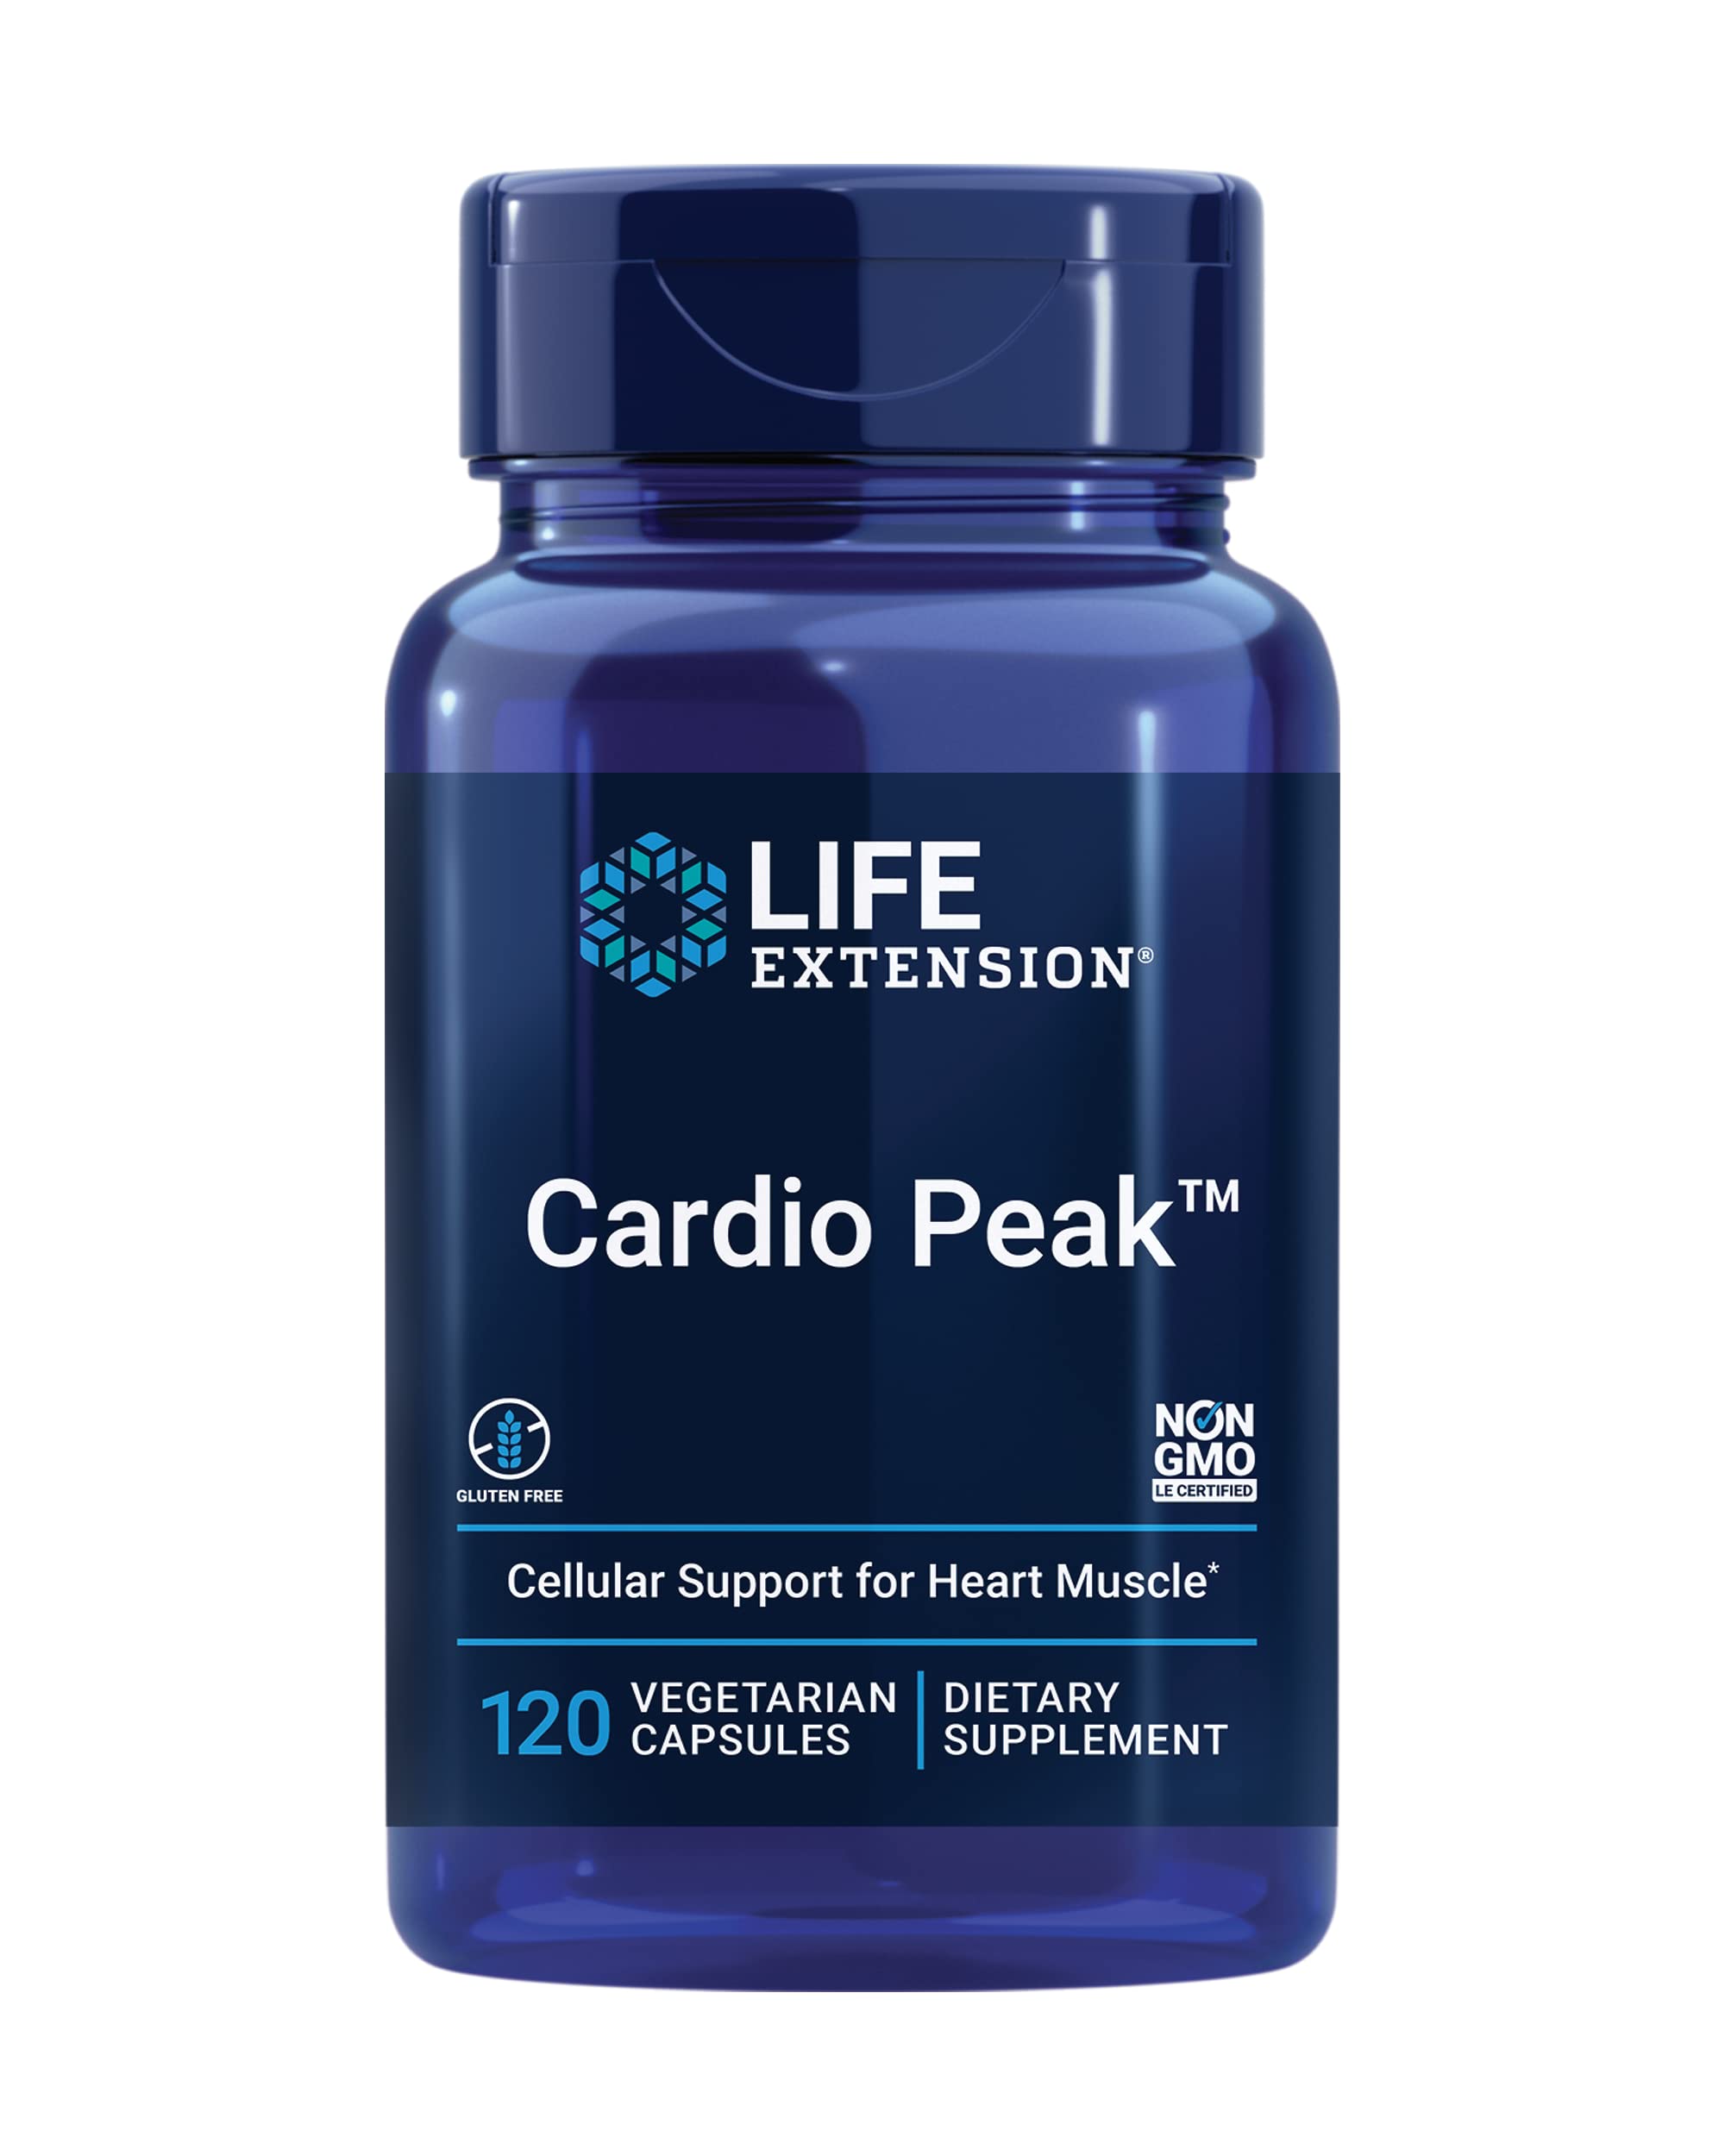 Book Cover Life Extension Cardio Peak - Hawthorn Extract (Leaf, Flower, Stem) Supplement with Arjuna Extract for Heart Health Support - Twice Daily - Gluten Free, Non-GMO, Vegetarian - 120 Capsules